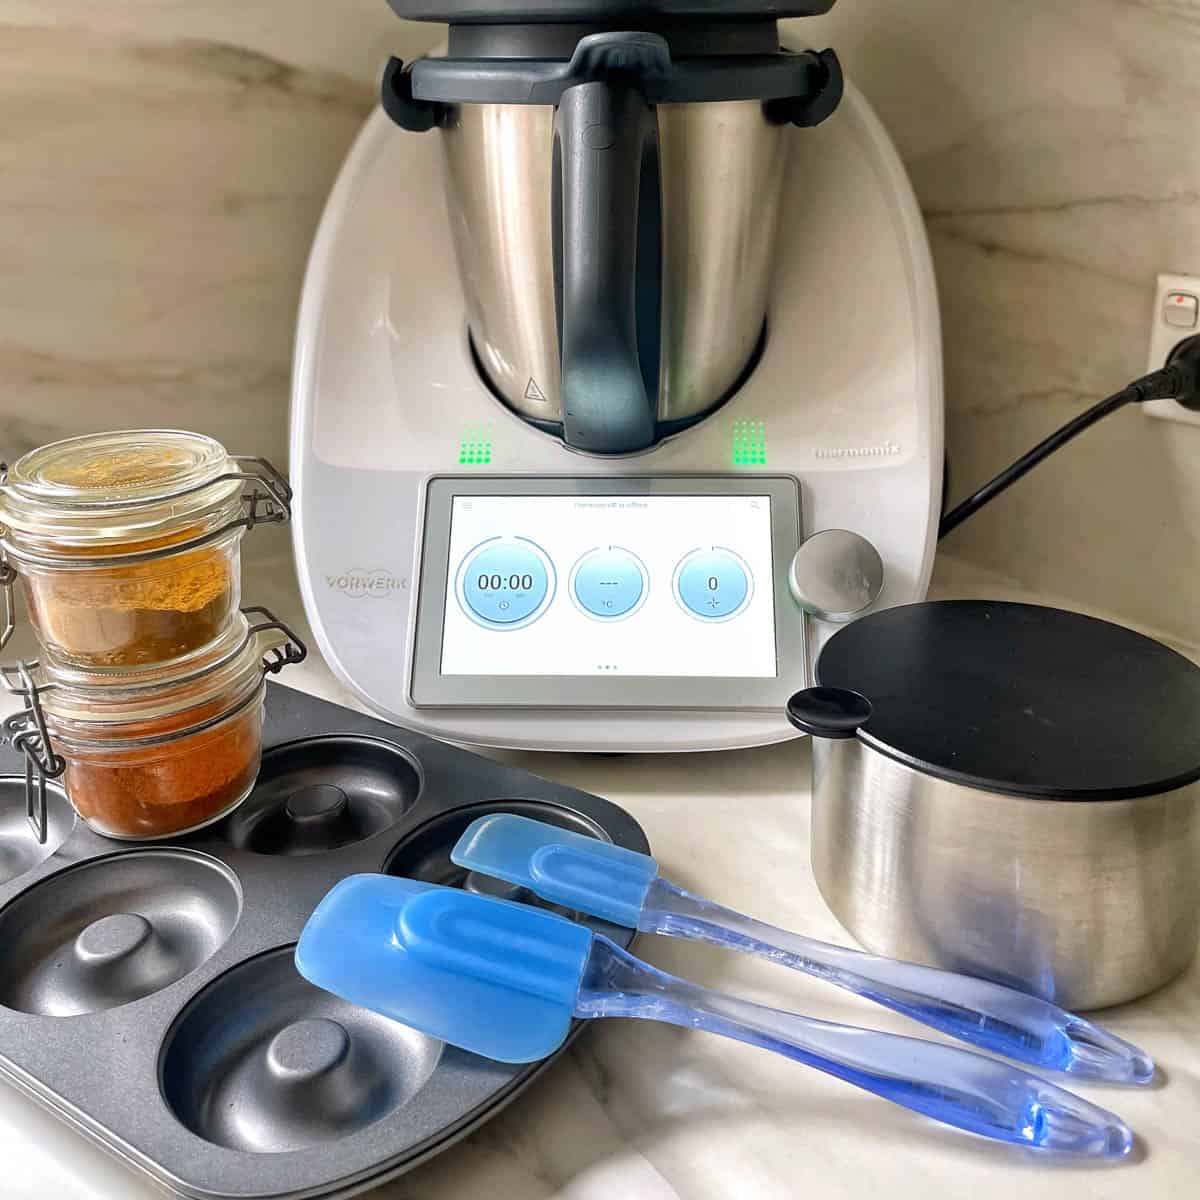 Thermomix with accessories